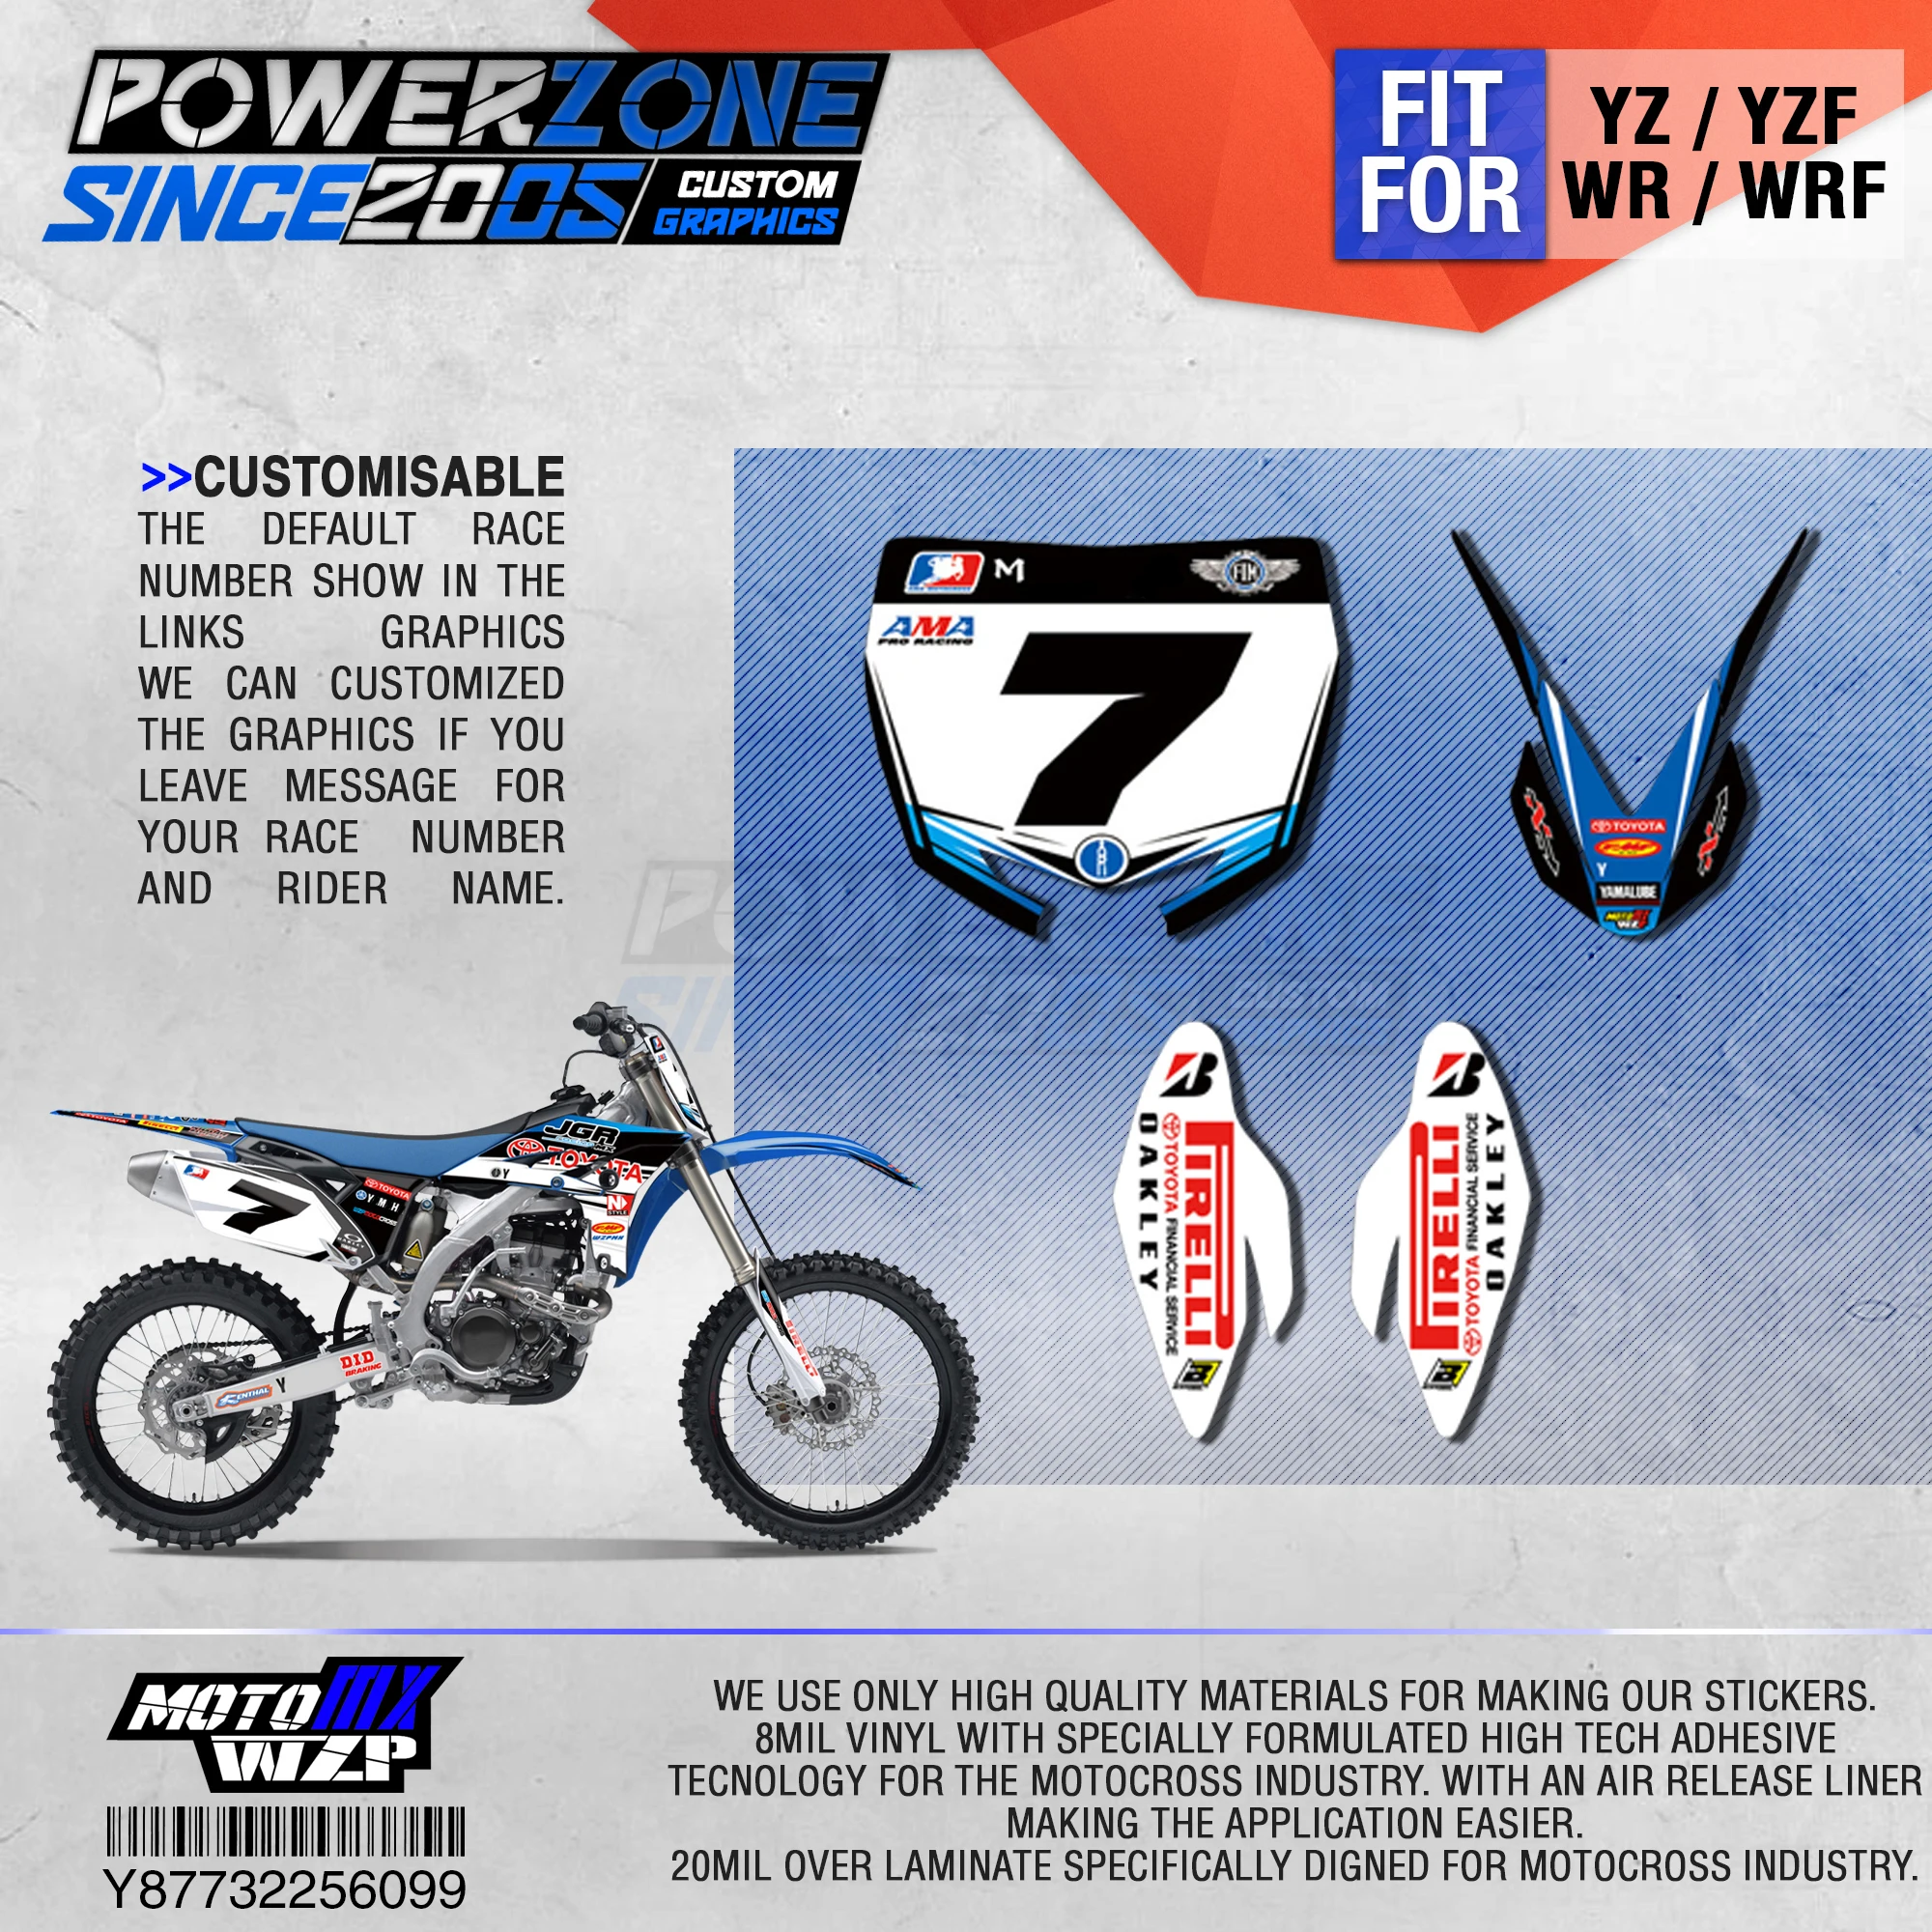 

PowerZone Customized Team Graphics Backgrounds Decals 3M Custom Stickers For YAMAHA YZF250 2010-2013 WR450F 2012-2015 YZ WRF 099